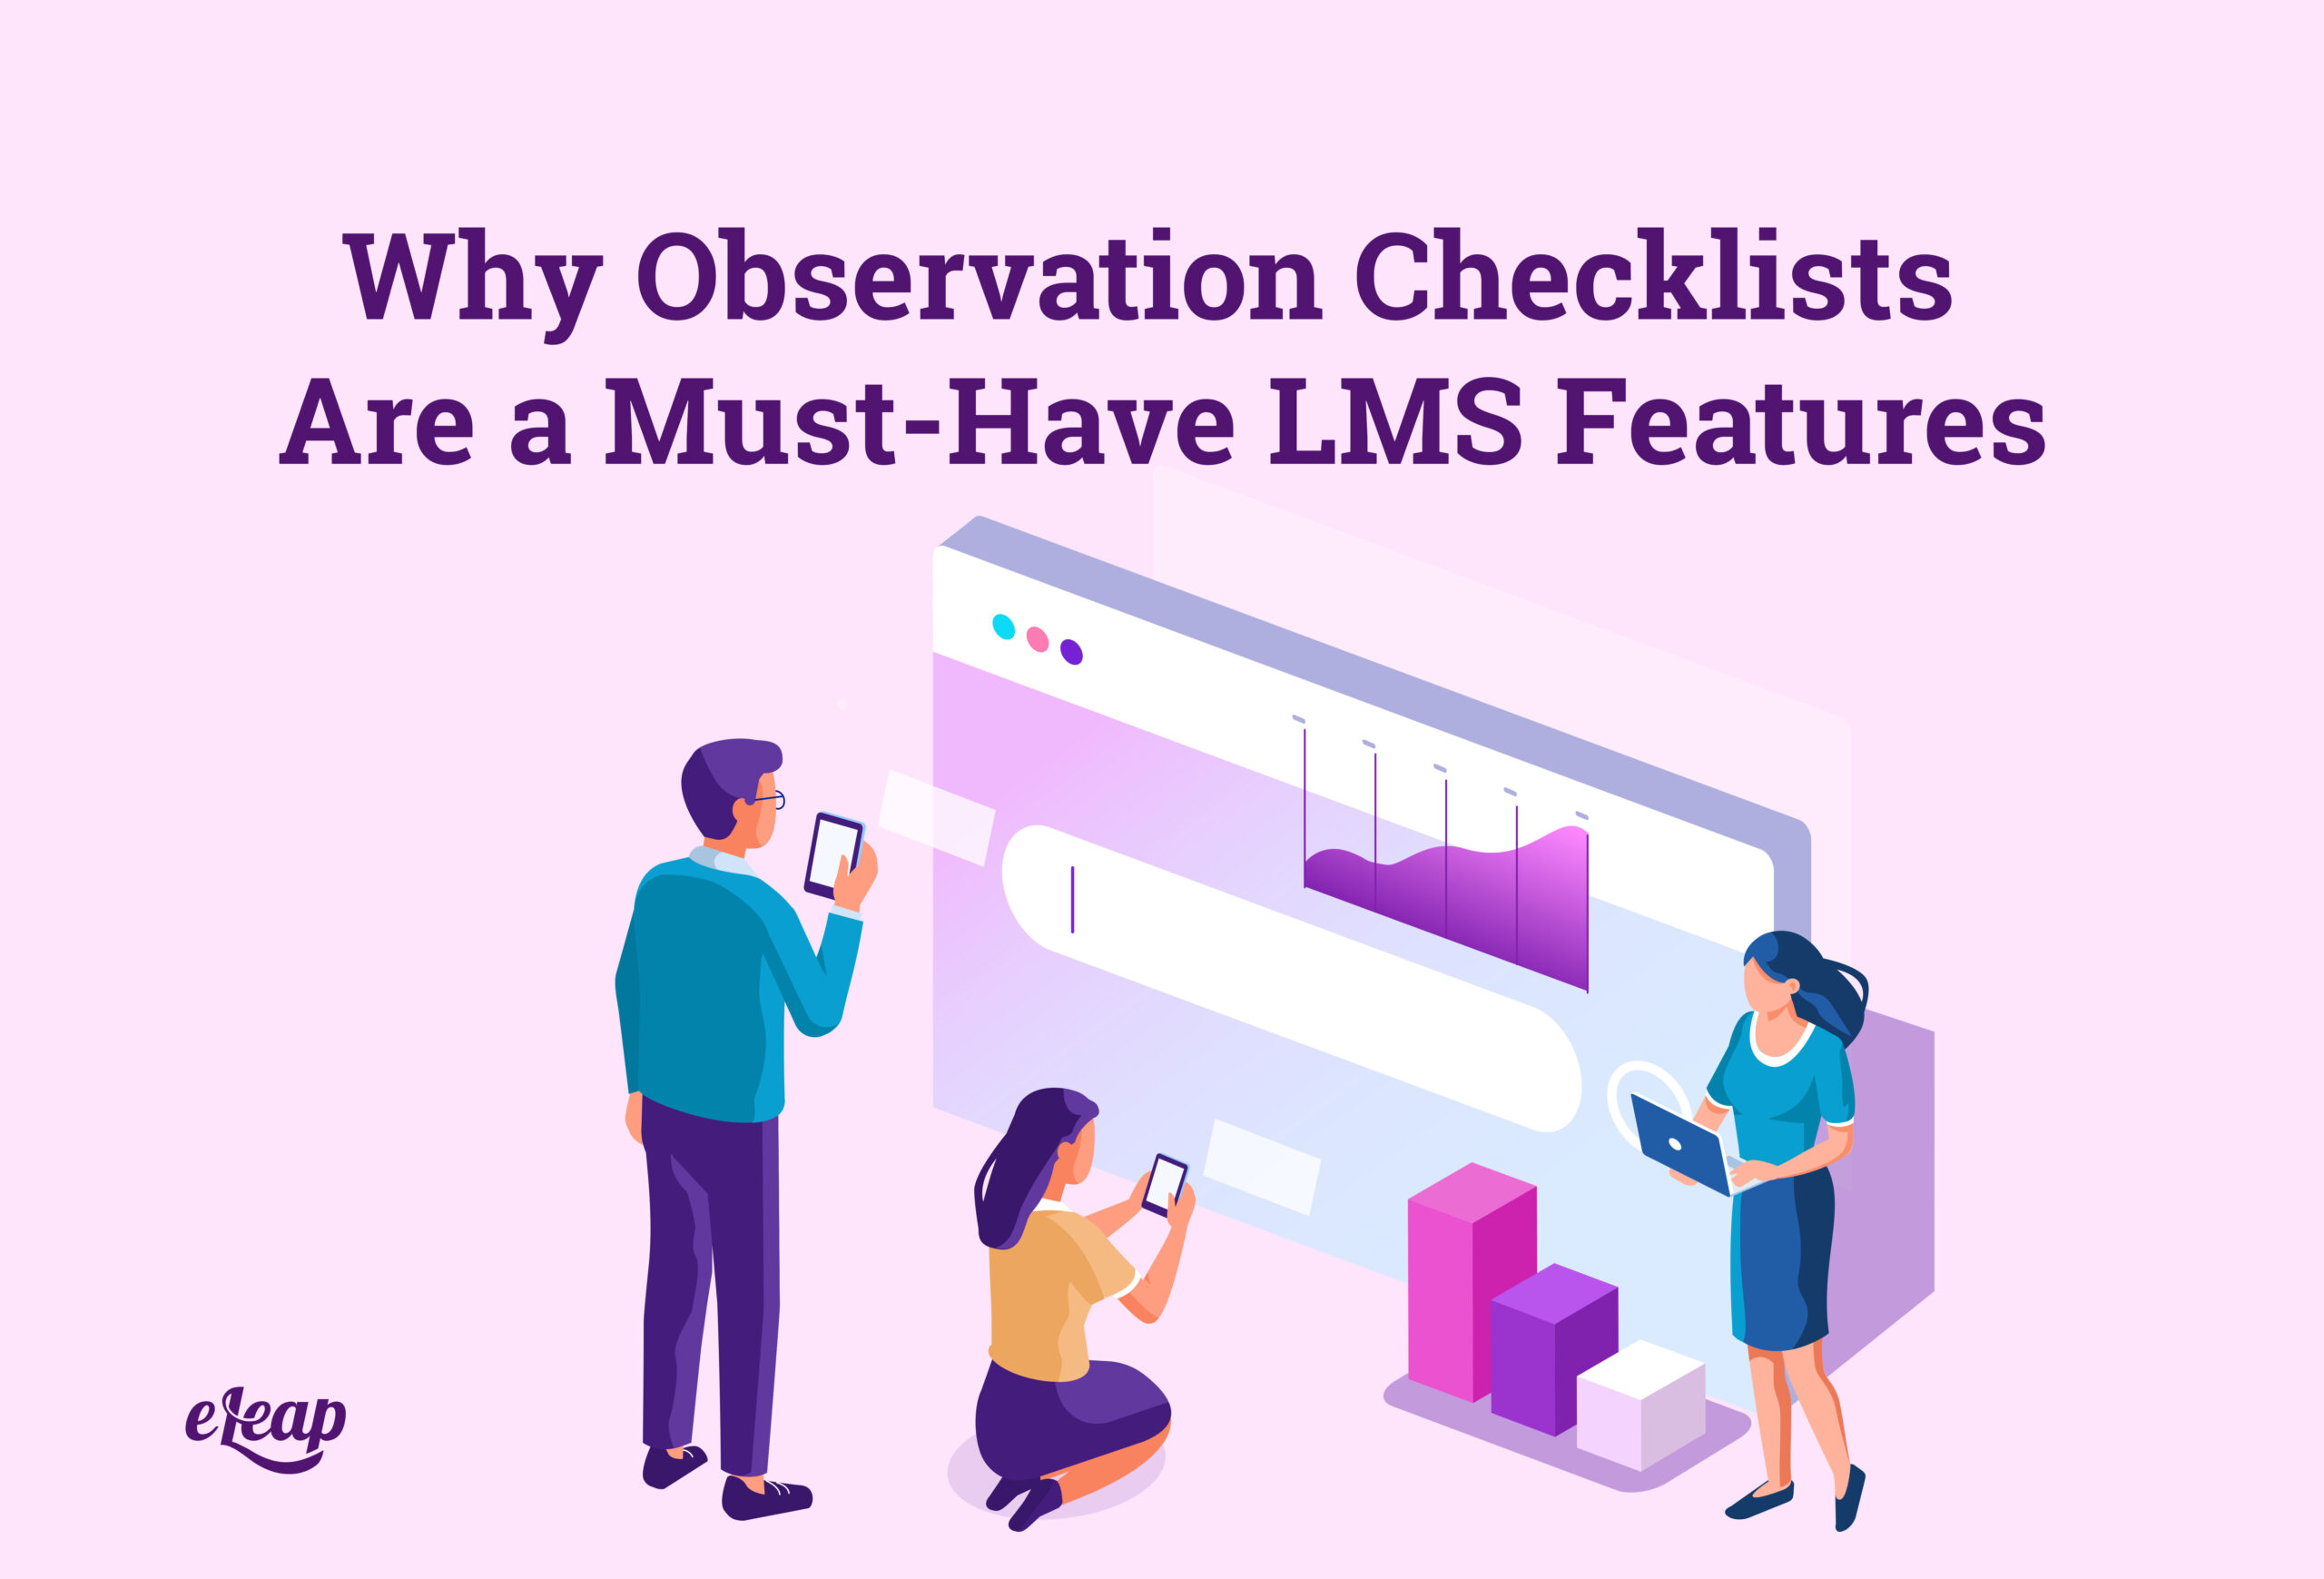 Why Observation Checklists Are a Must-Have LMS Features